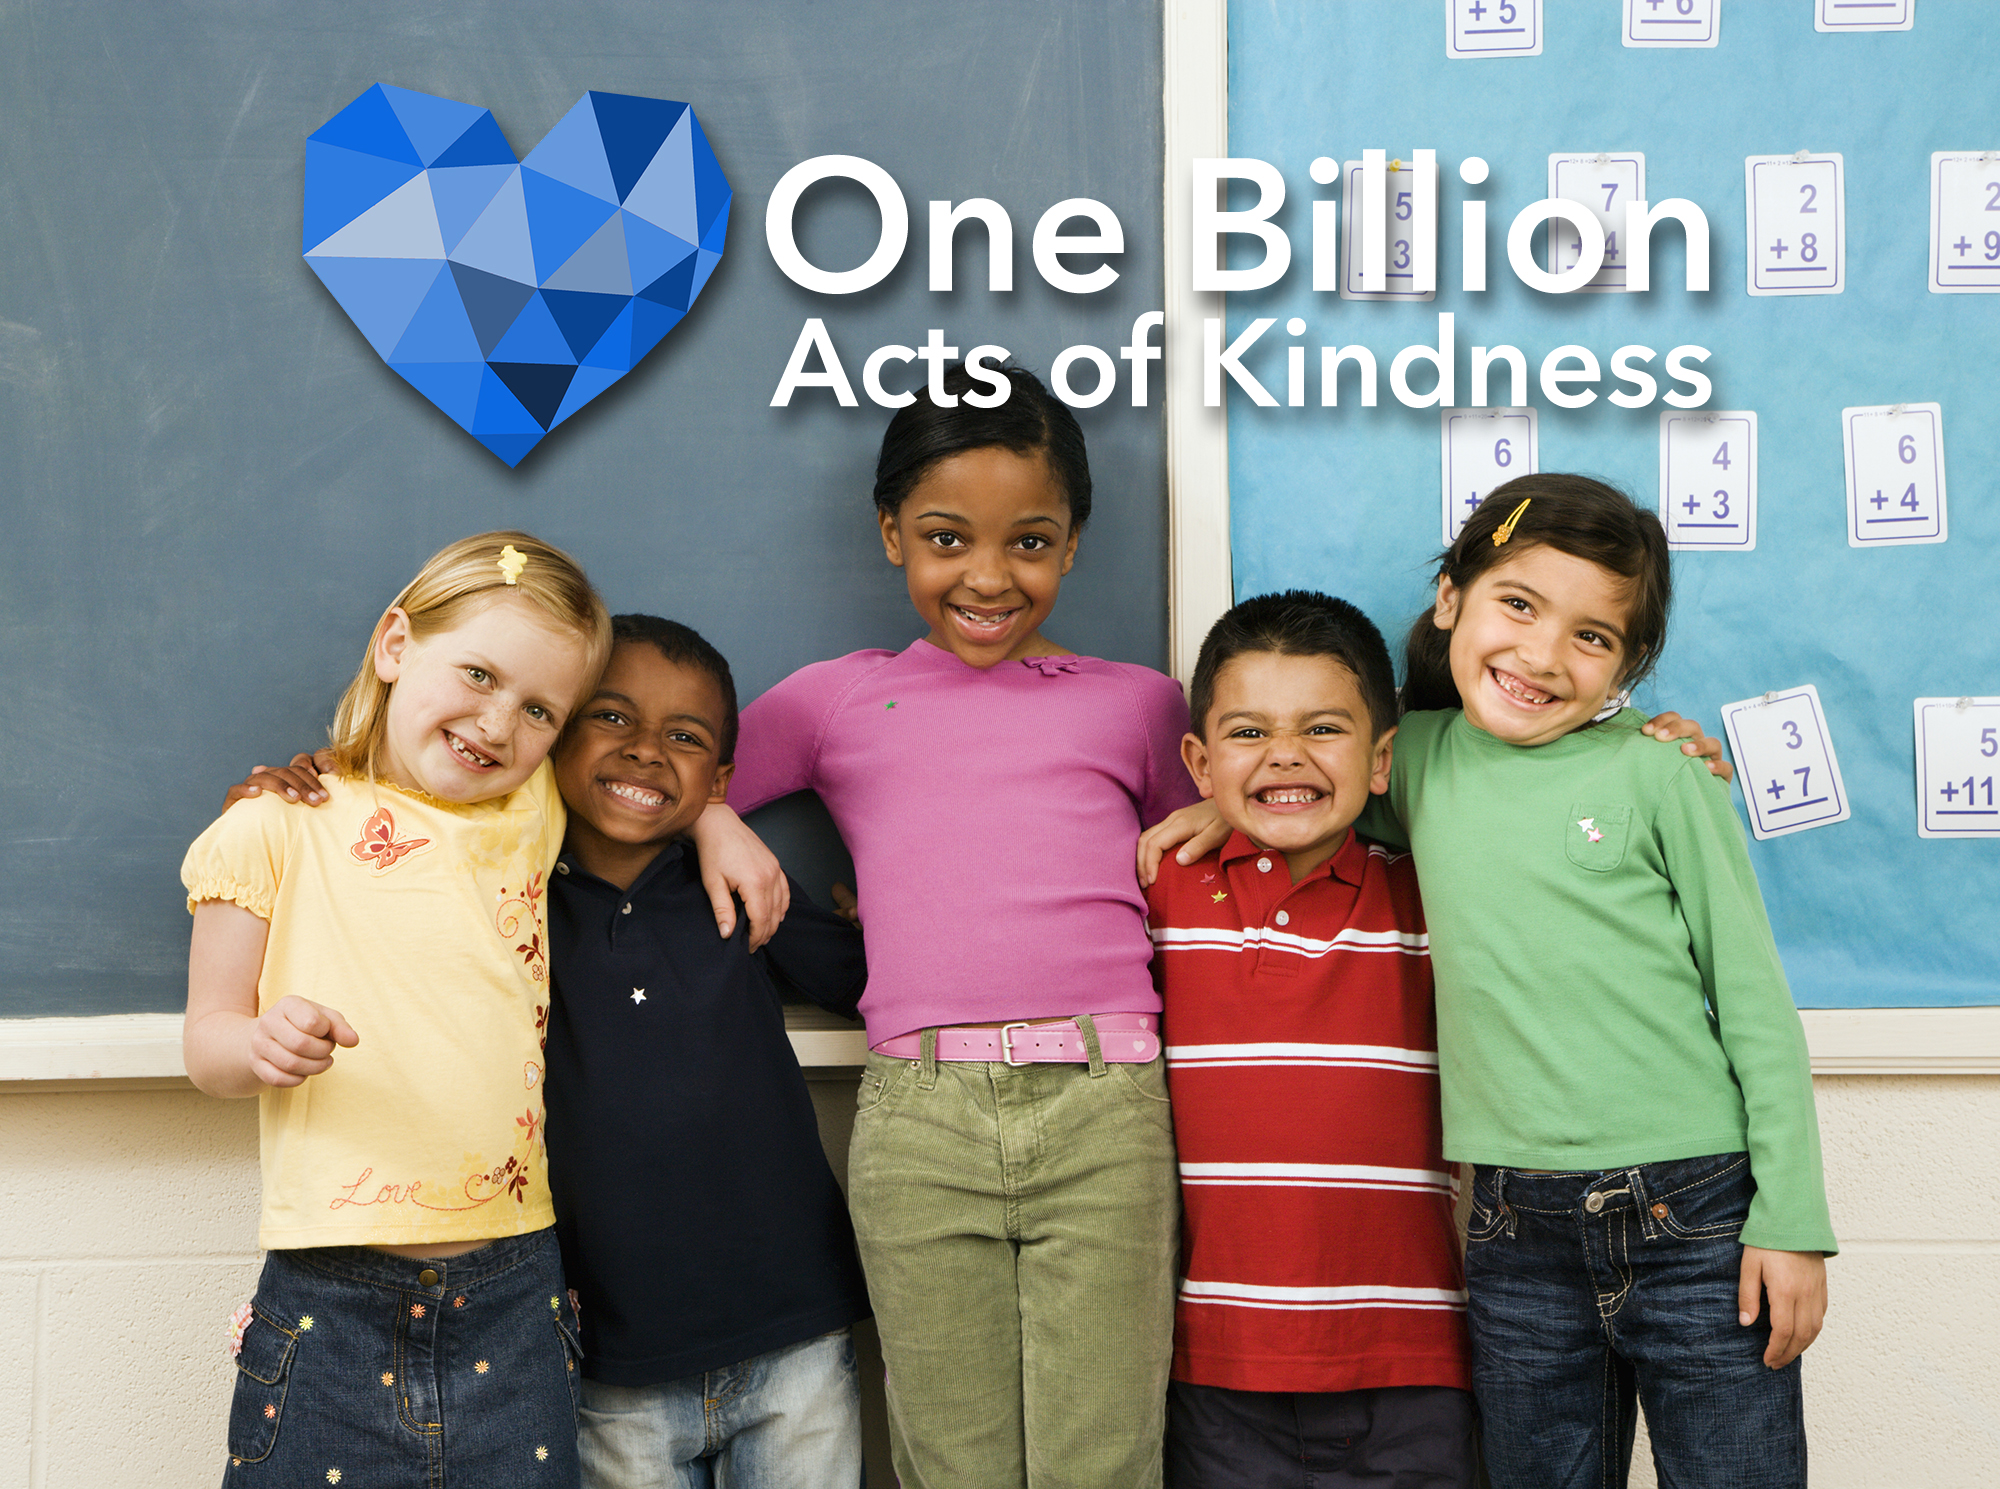 One Billion Acts of Kindness title card